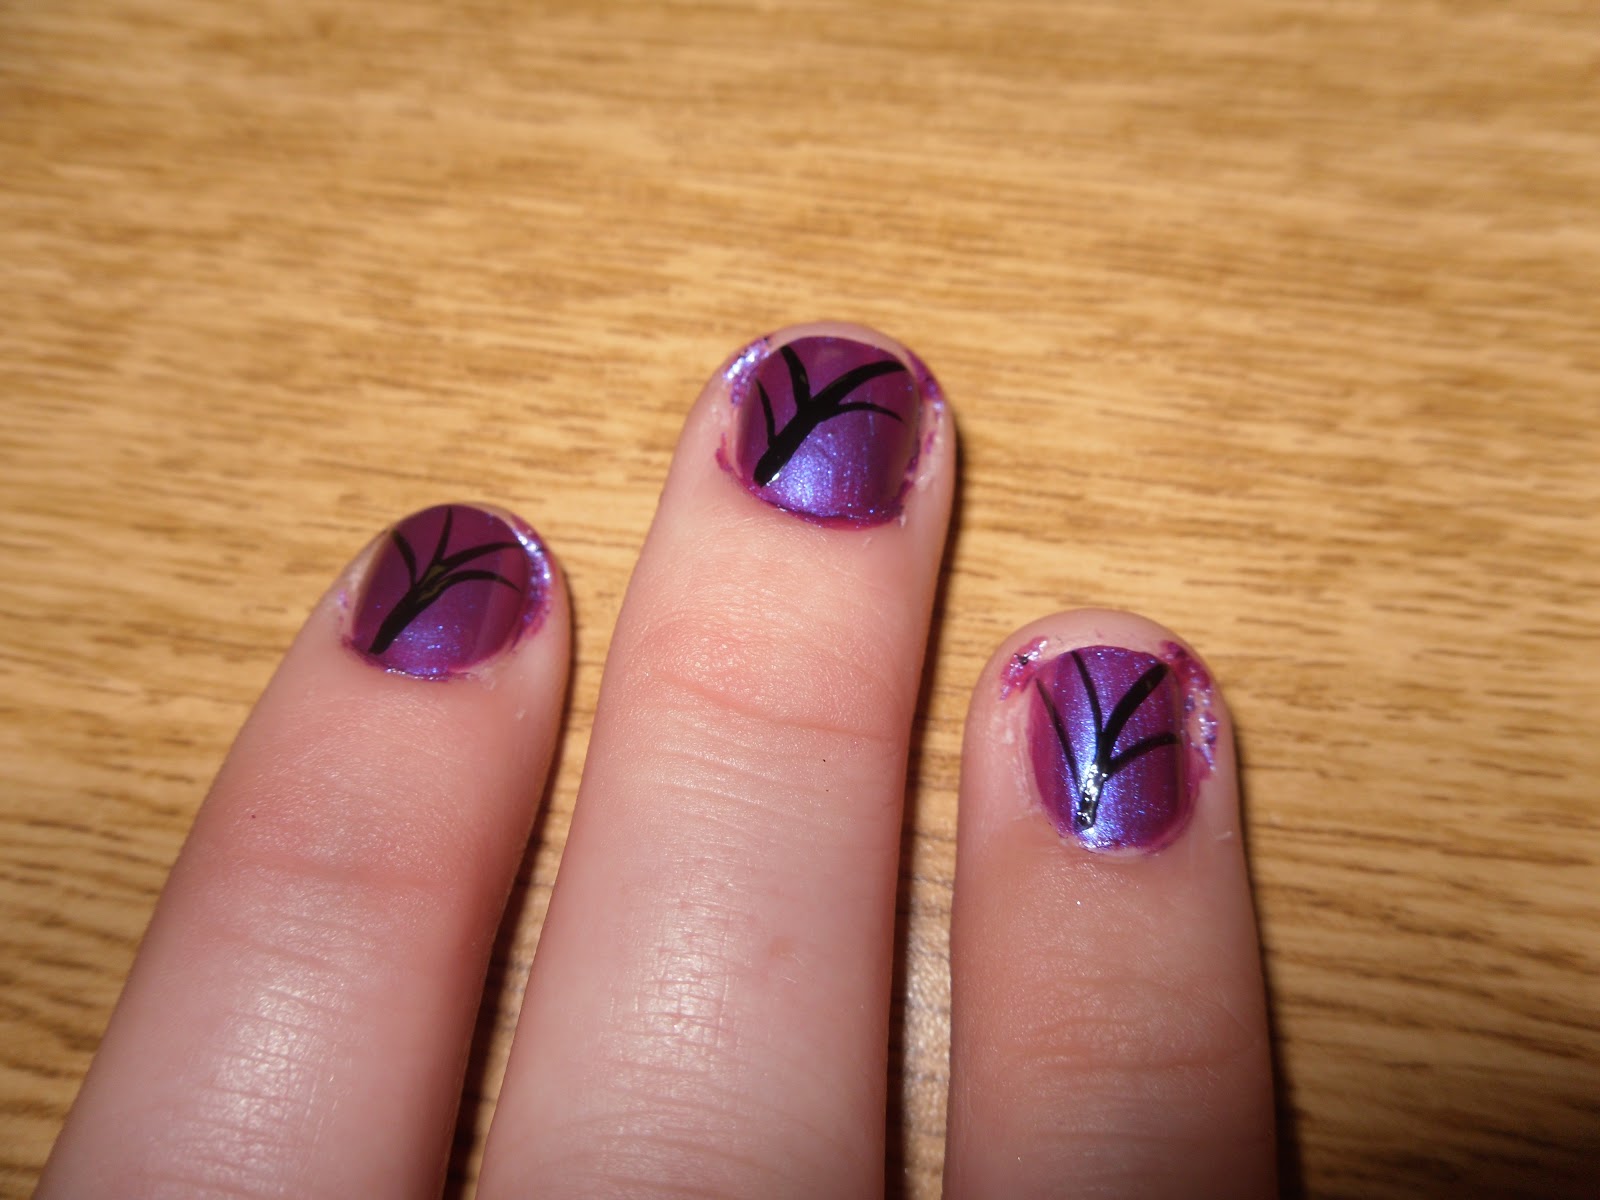 2. Floral Nail Art for Prom - wide 3